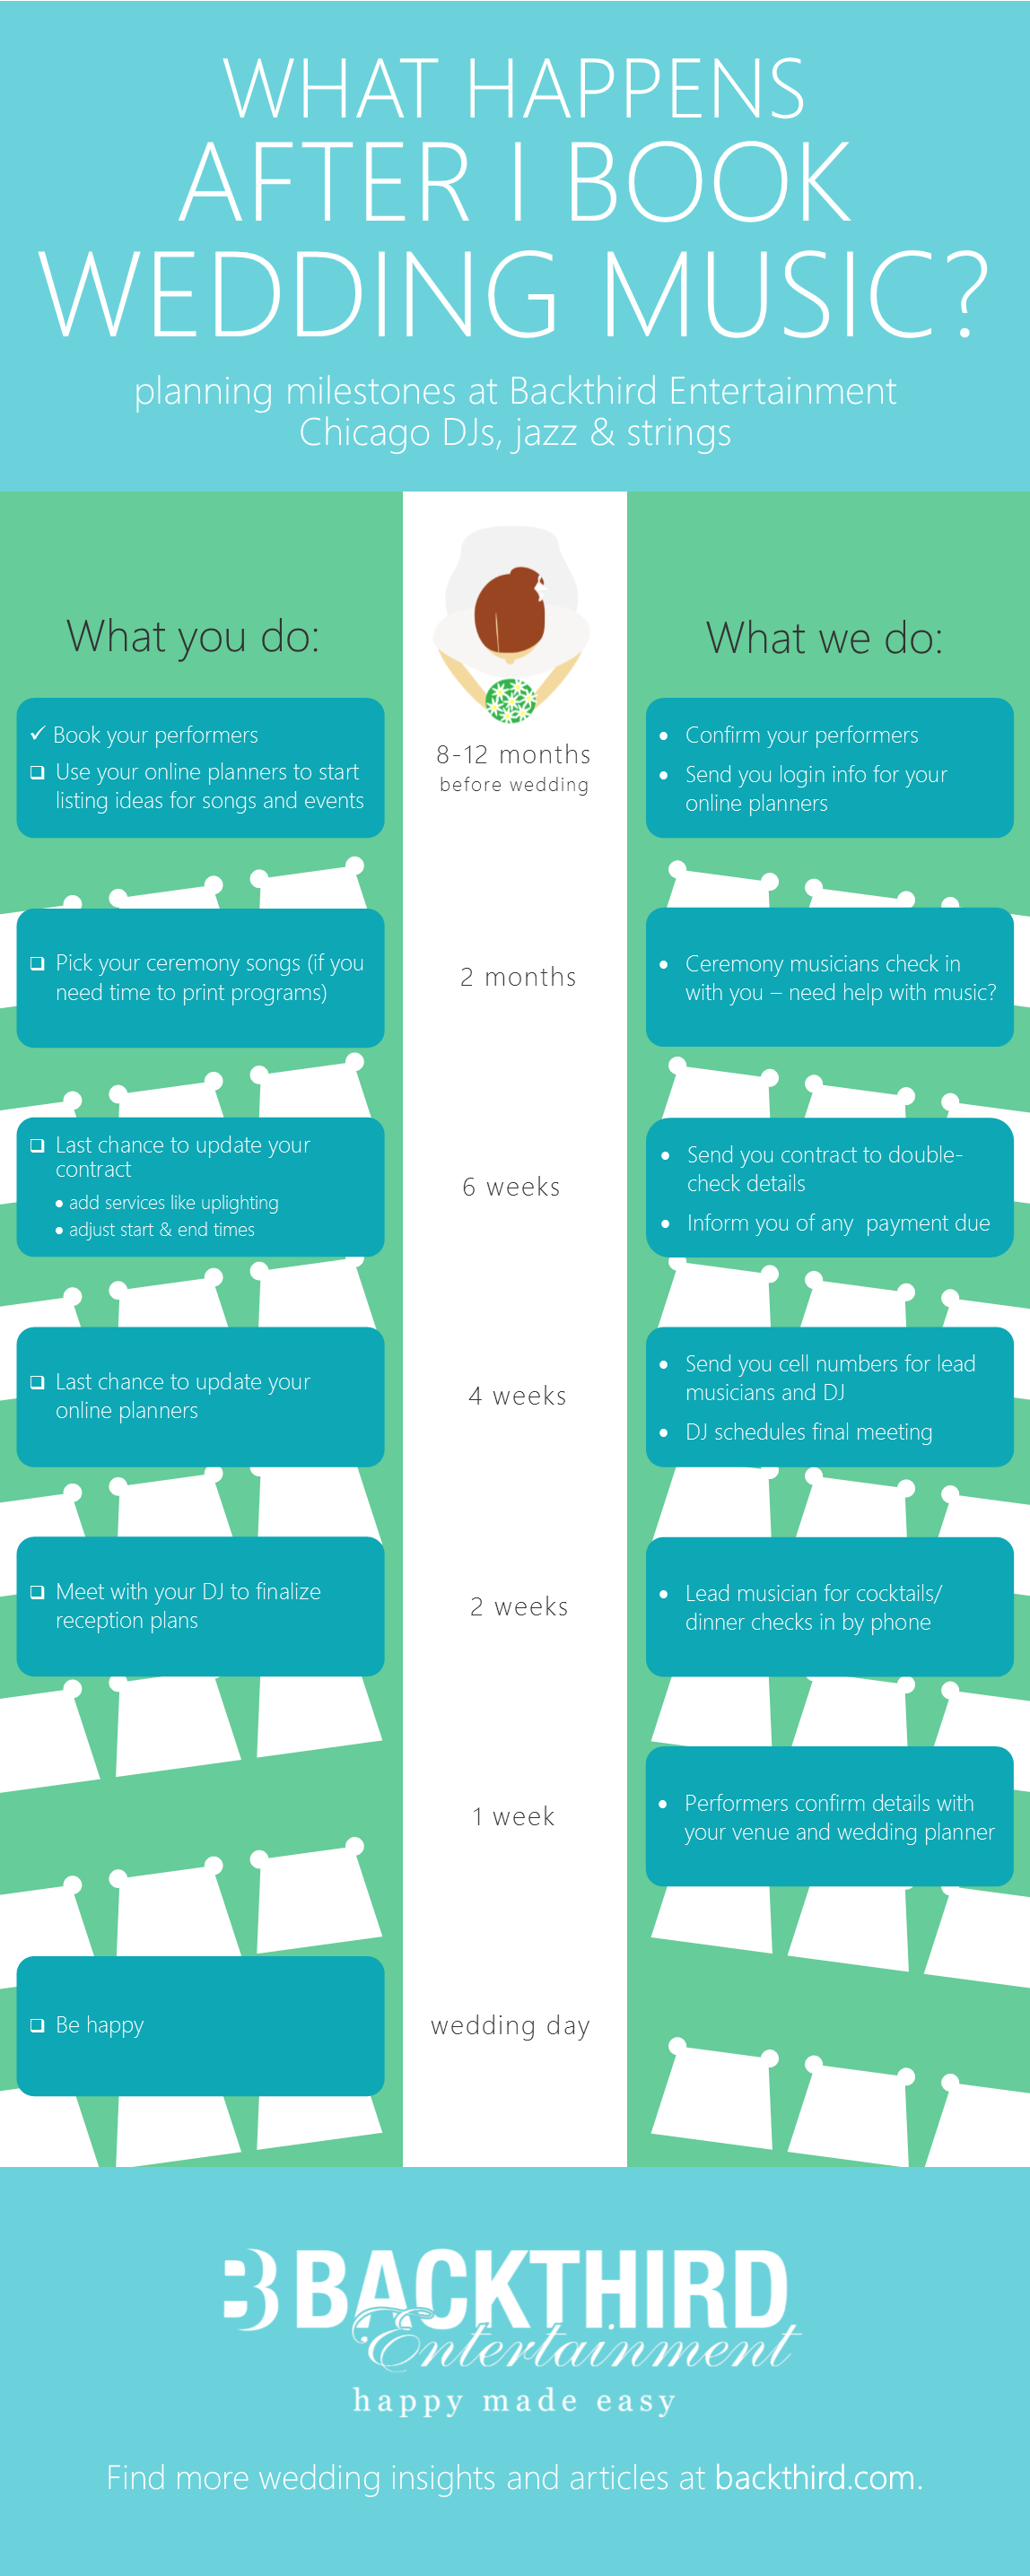 2015-updates-After-I-Book-infographic